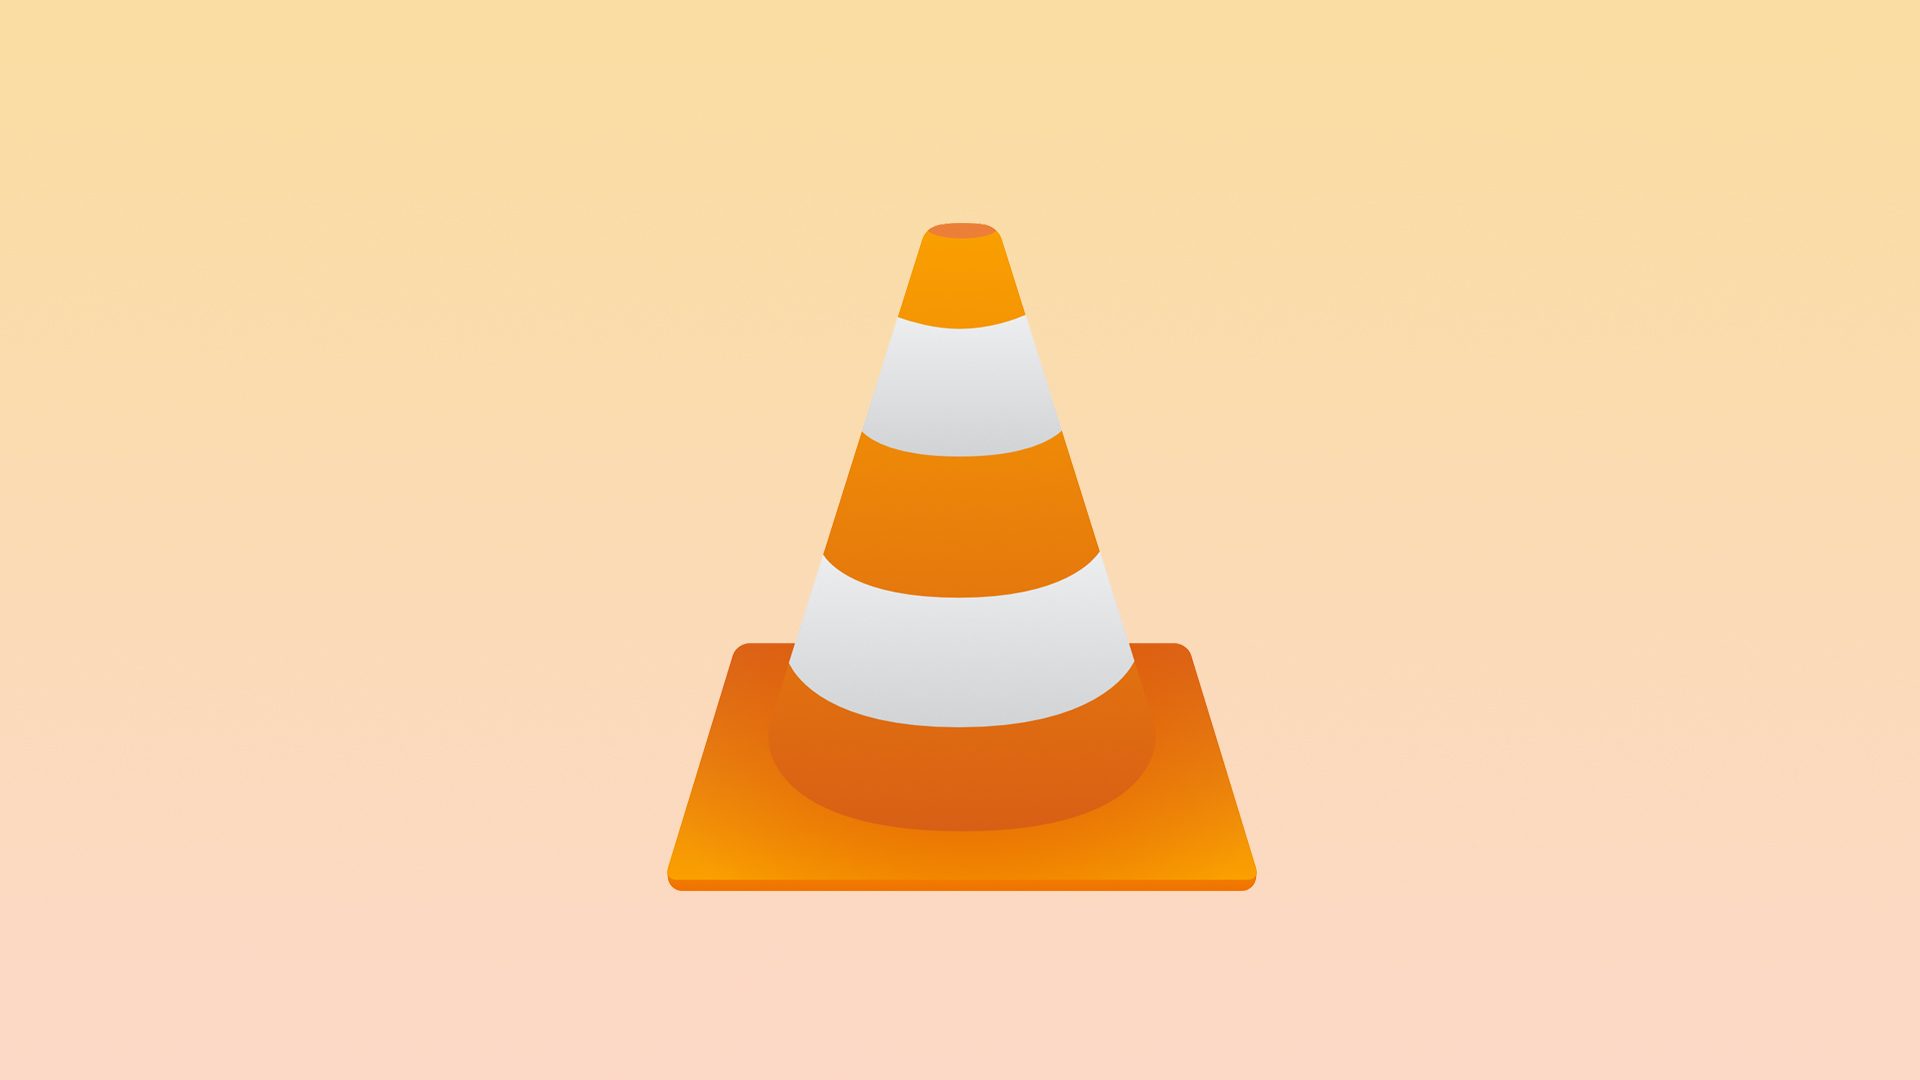 how to cast vlc to chromecast from pc